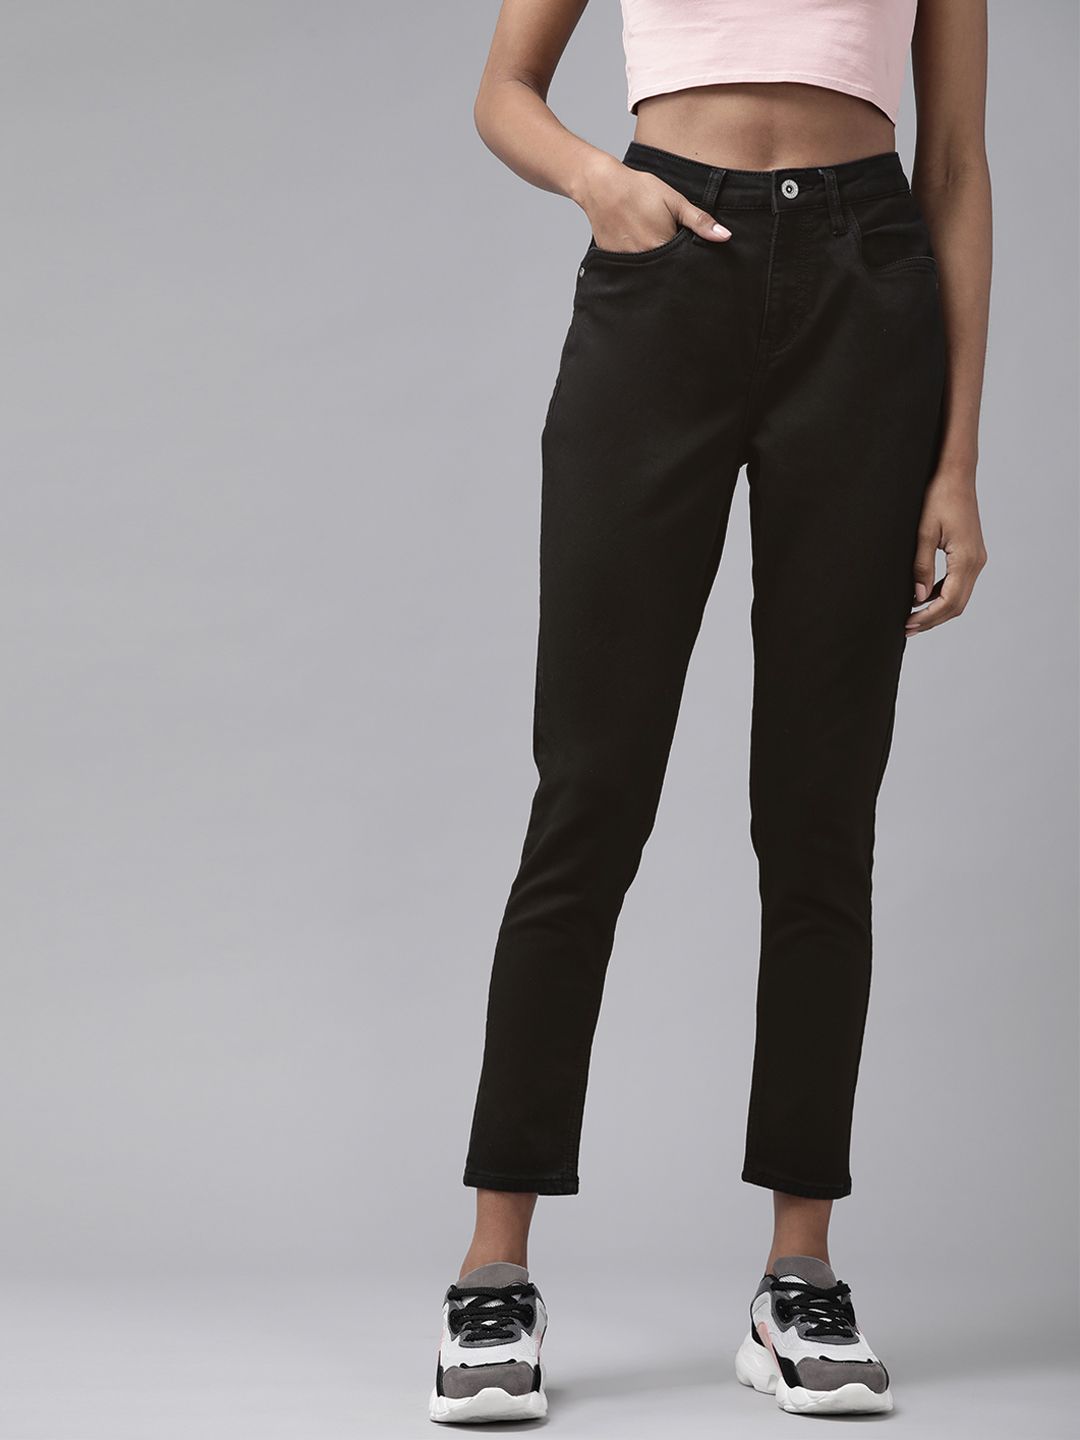 Roadster Women Black Solid Skinny Fit Stretchable Jeans Price in India